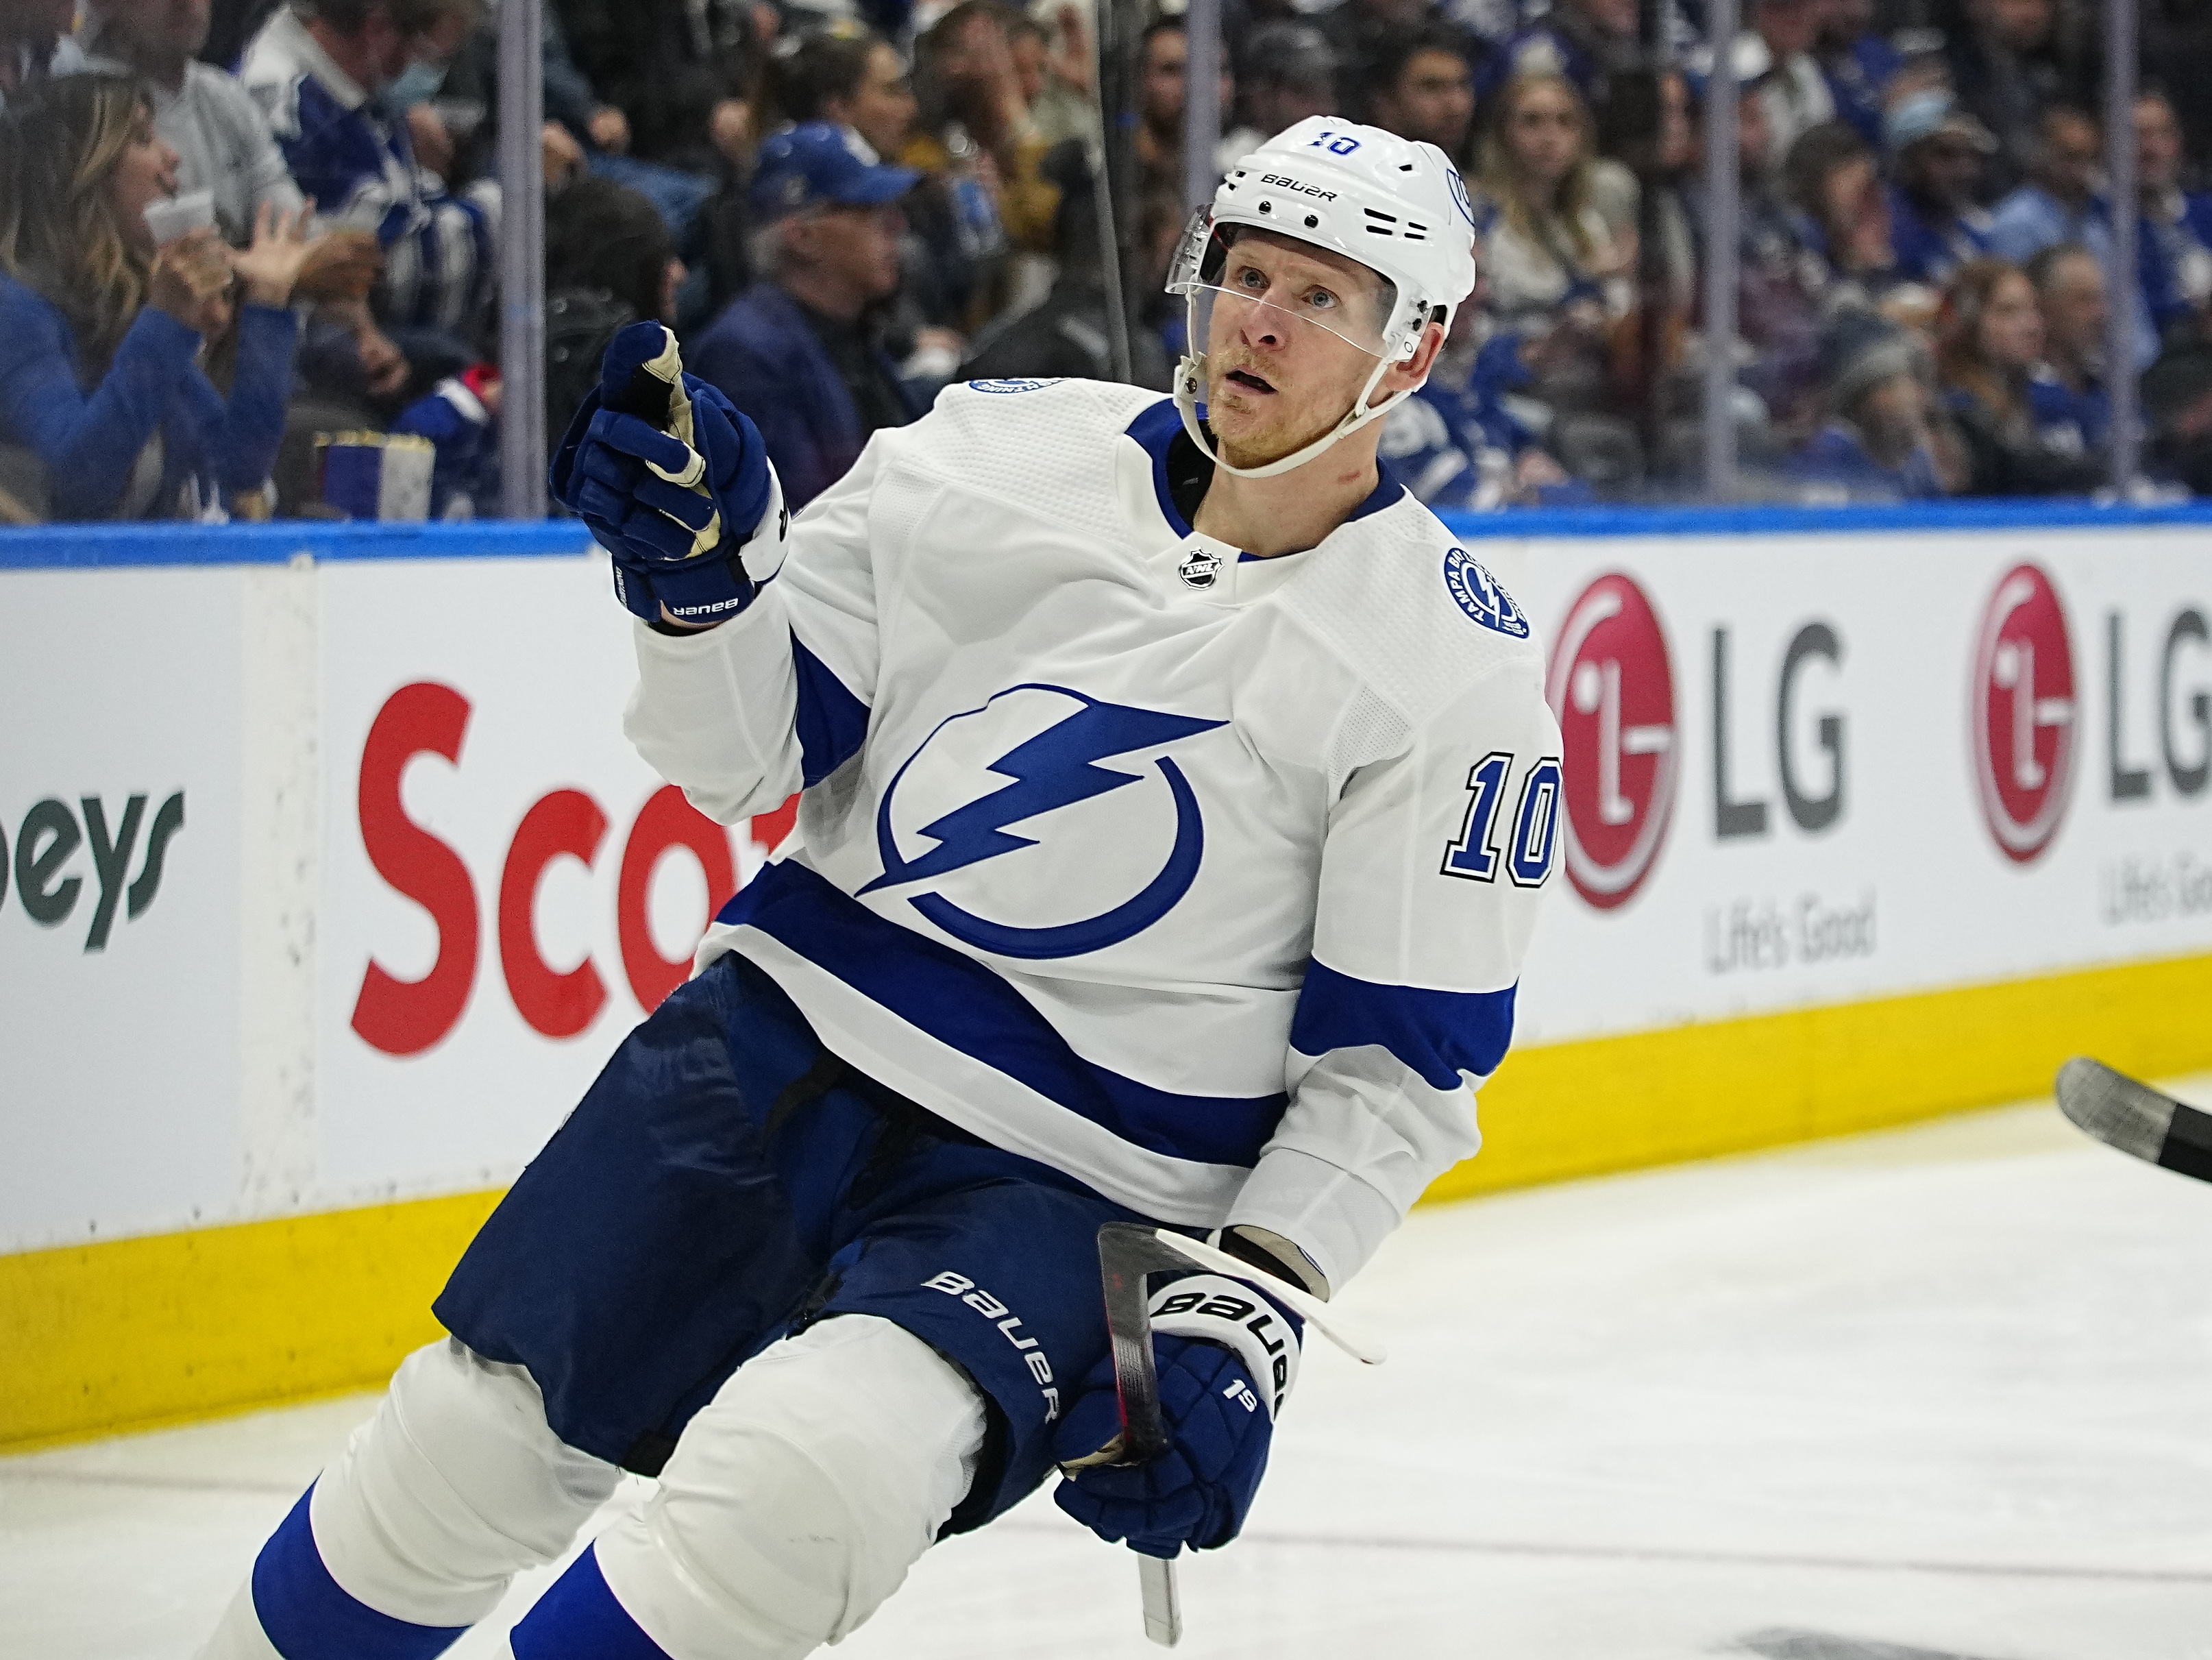 Straight to the Point! Tampa Bay Lightning forward Brayden Point